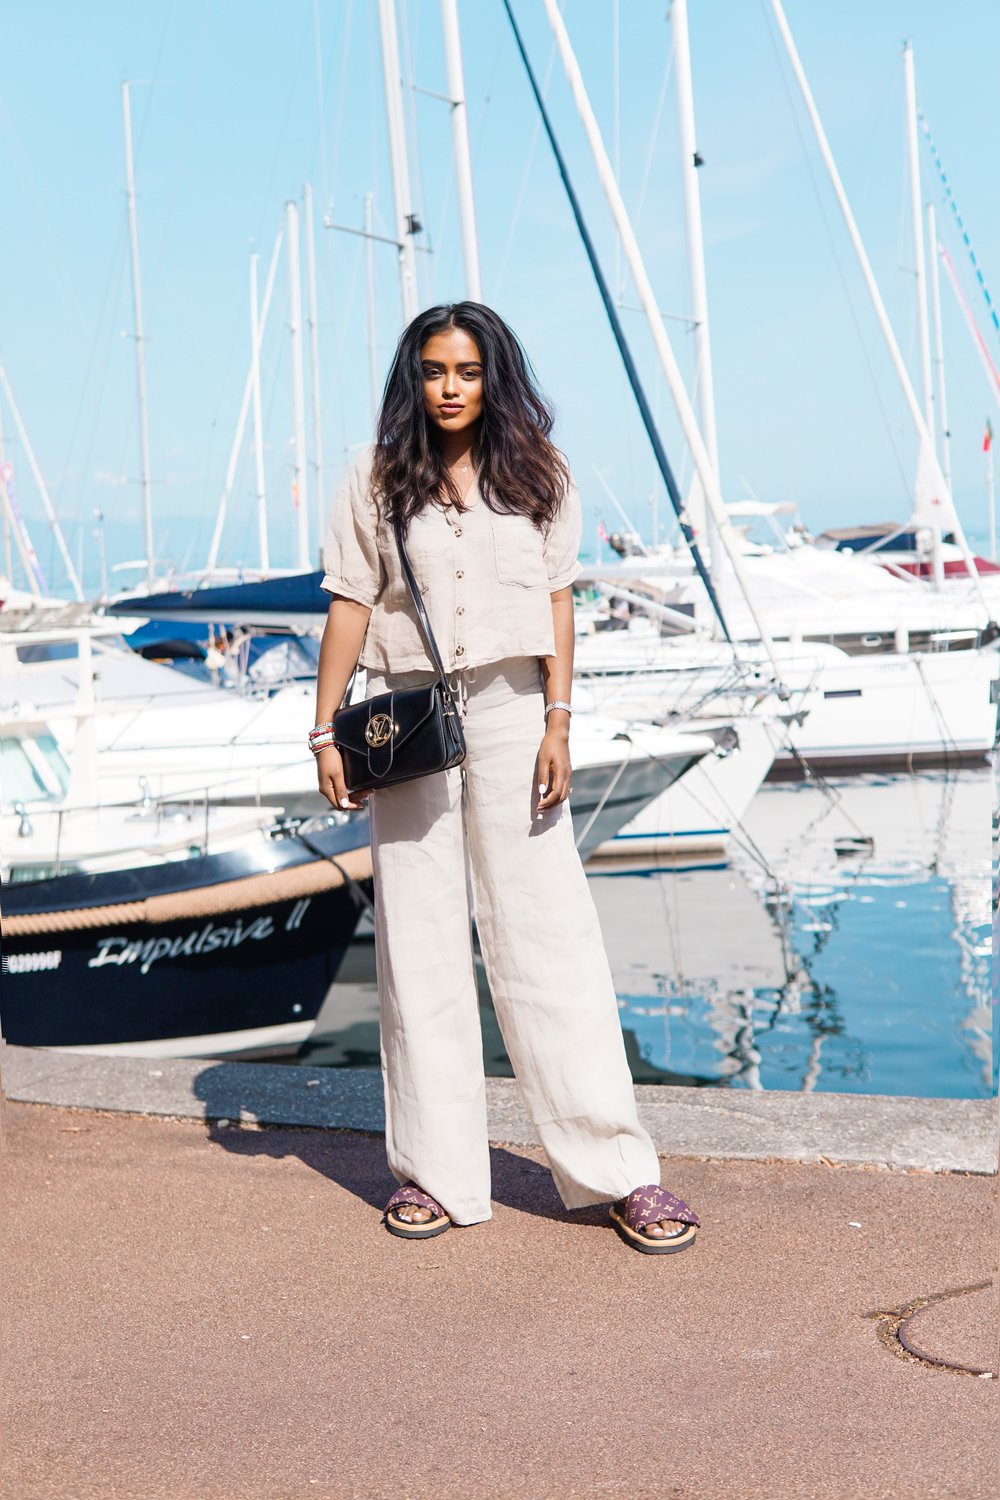 Sachini at a harbour in front of boots wearing a beige top and trousers and Louis Vuitton slides holding a black Louis Vuitton bag